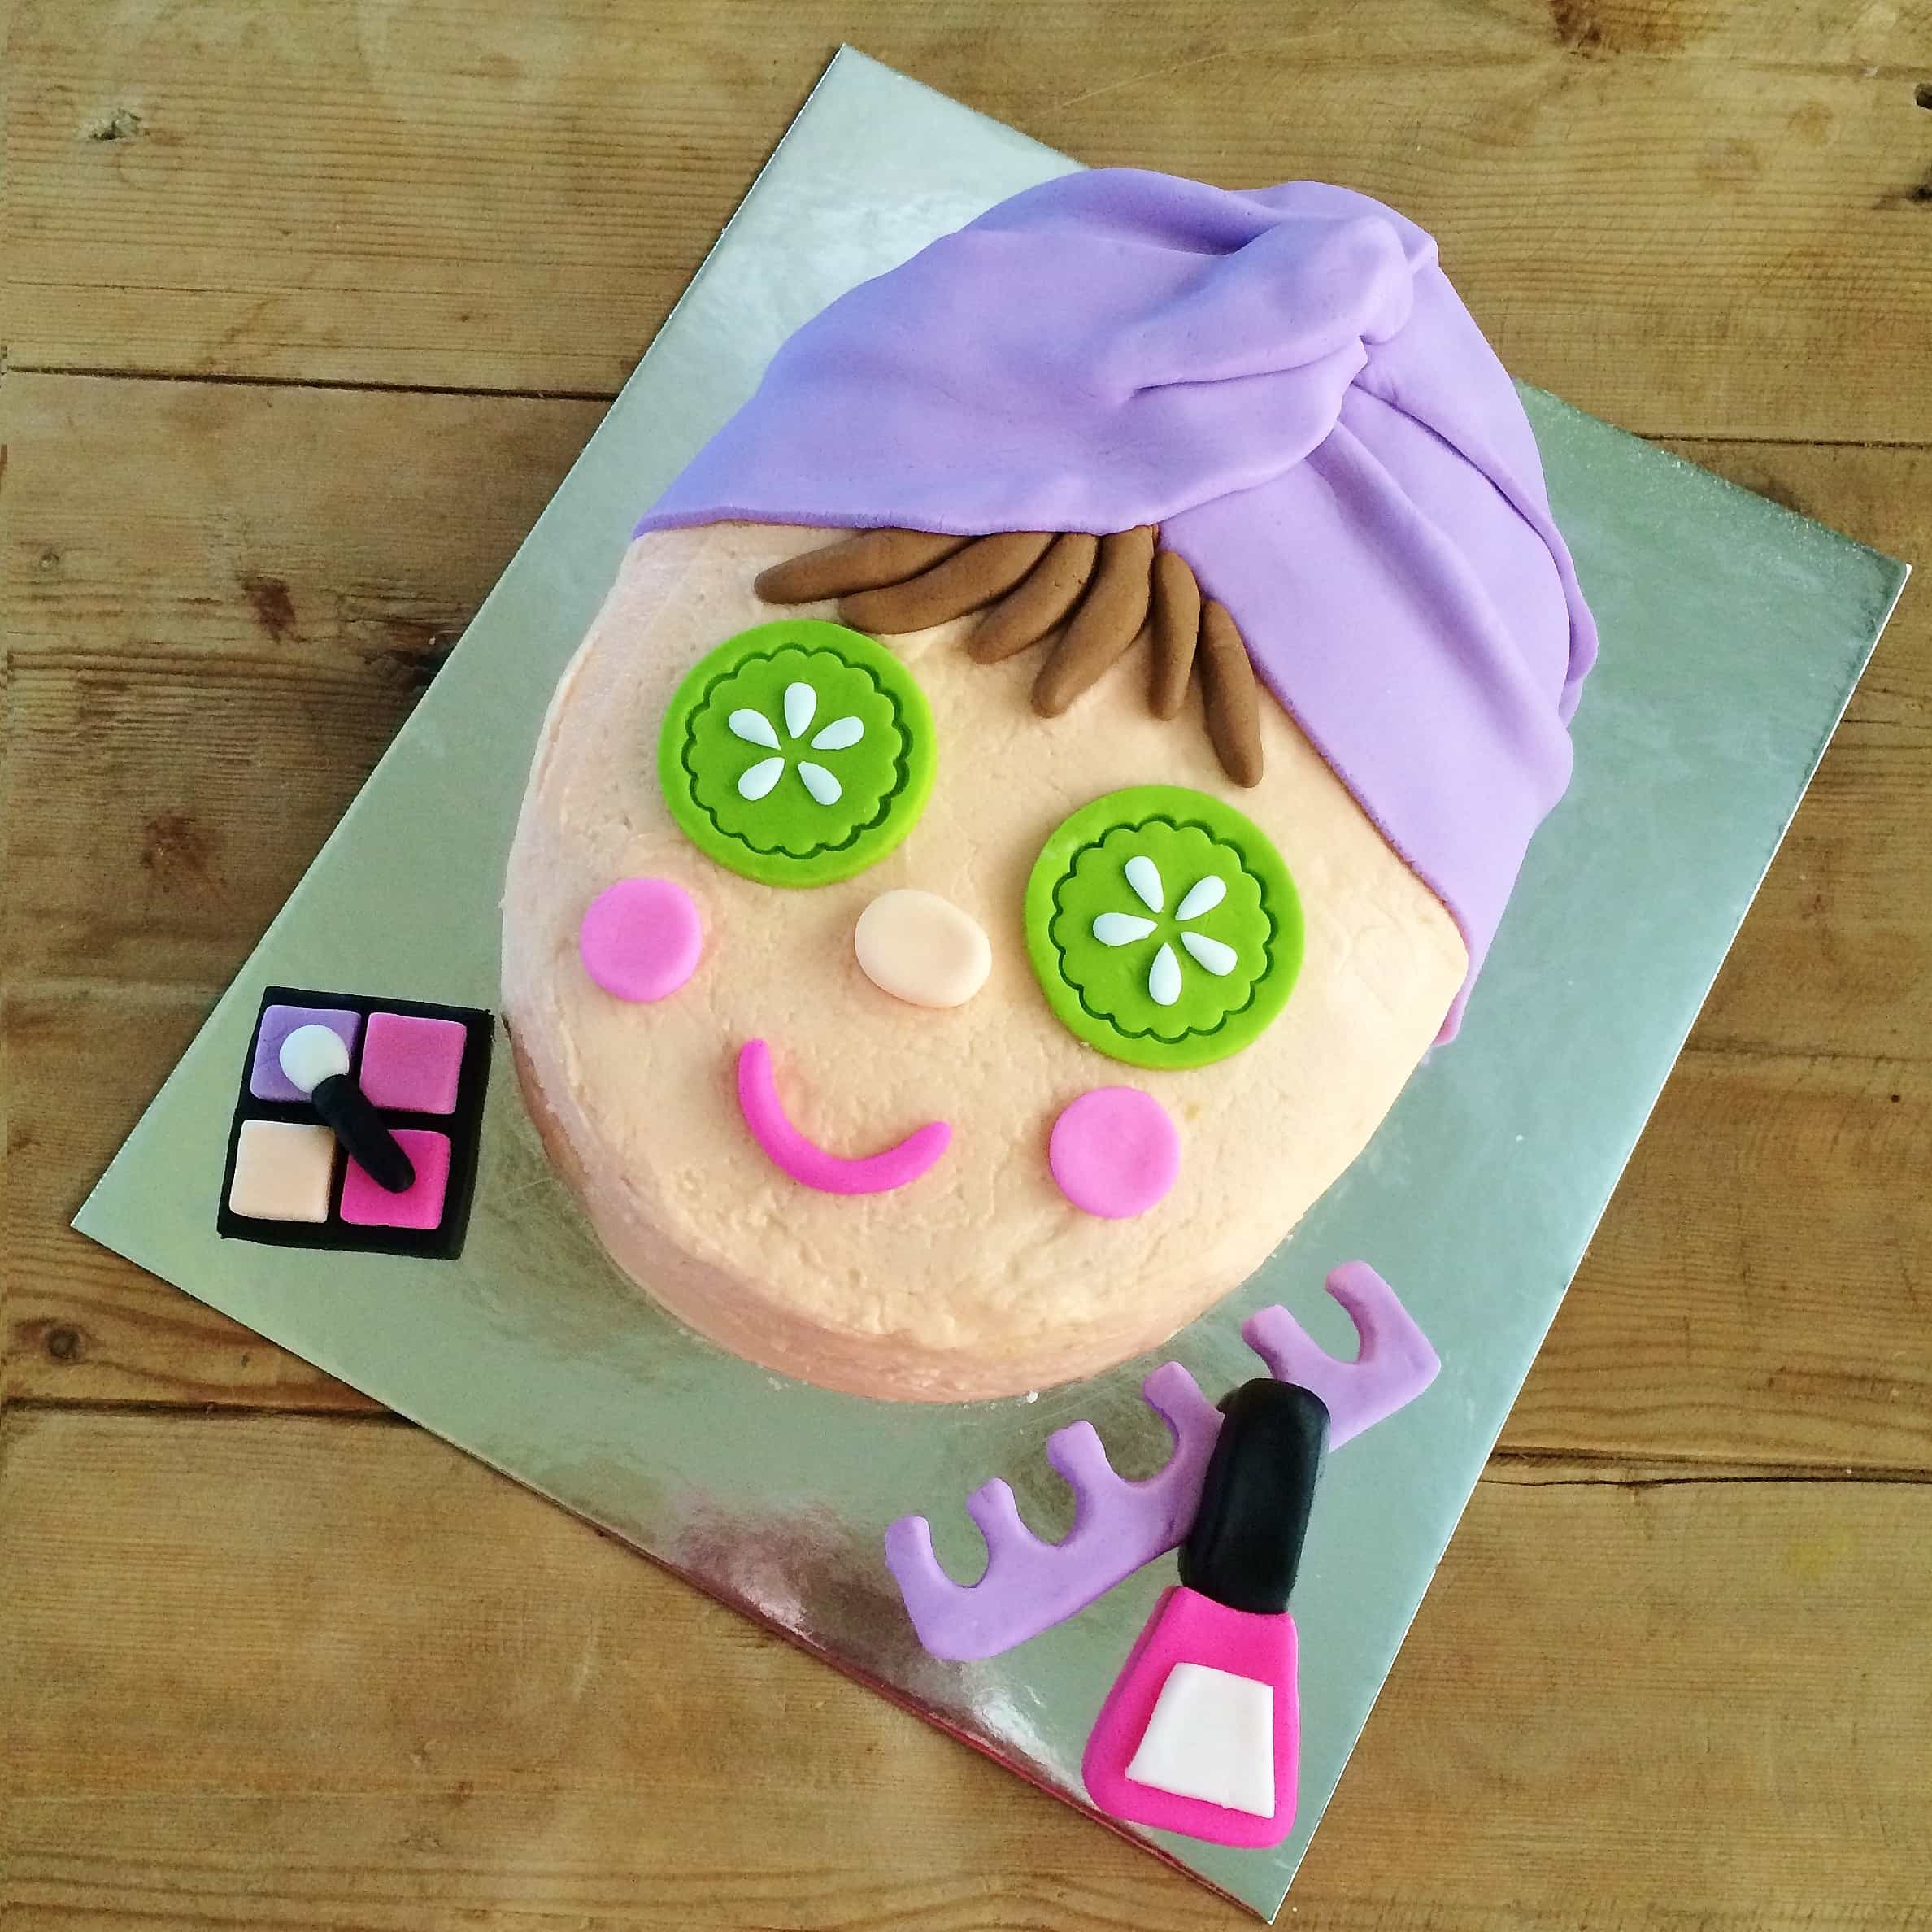 Spa Party for Girls Birthday Cake